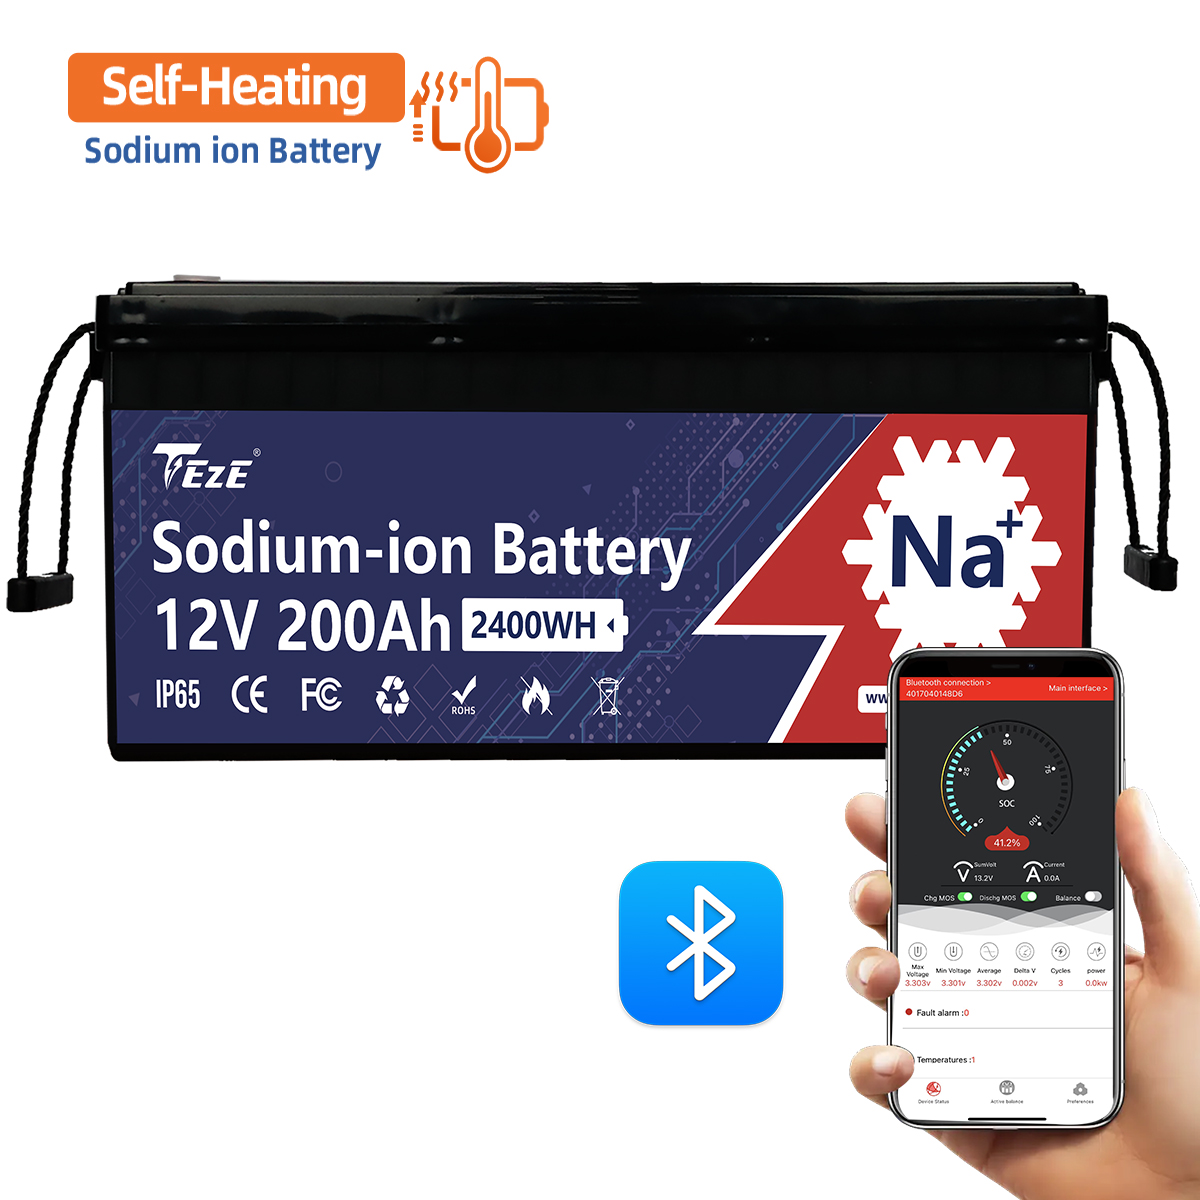 TezePower 12V 200Ah Sodium ion Battery with Bluetooth, Self-heating and Active Balancer, Built-in 200A Daly BMS (Bluetooth Built-in Version)